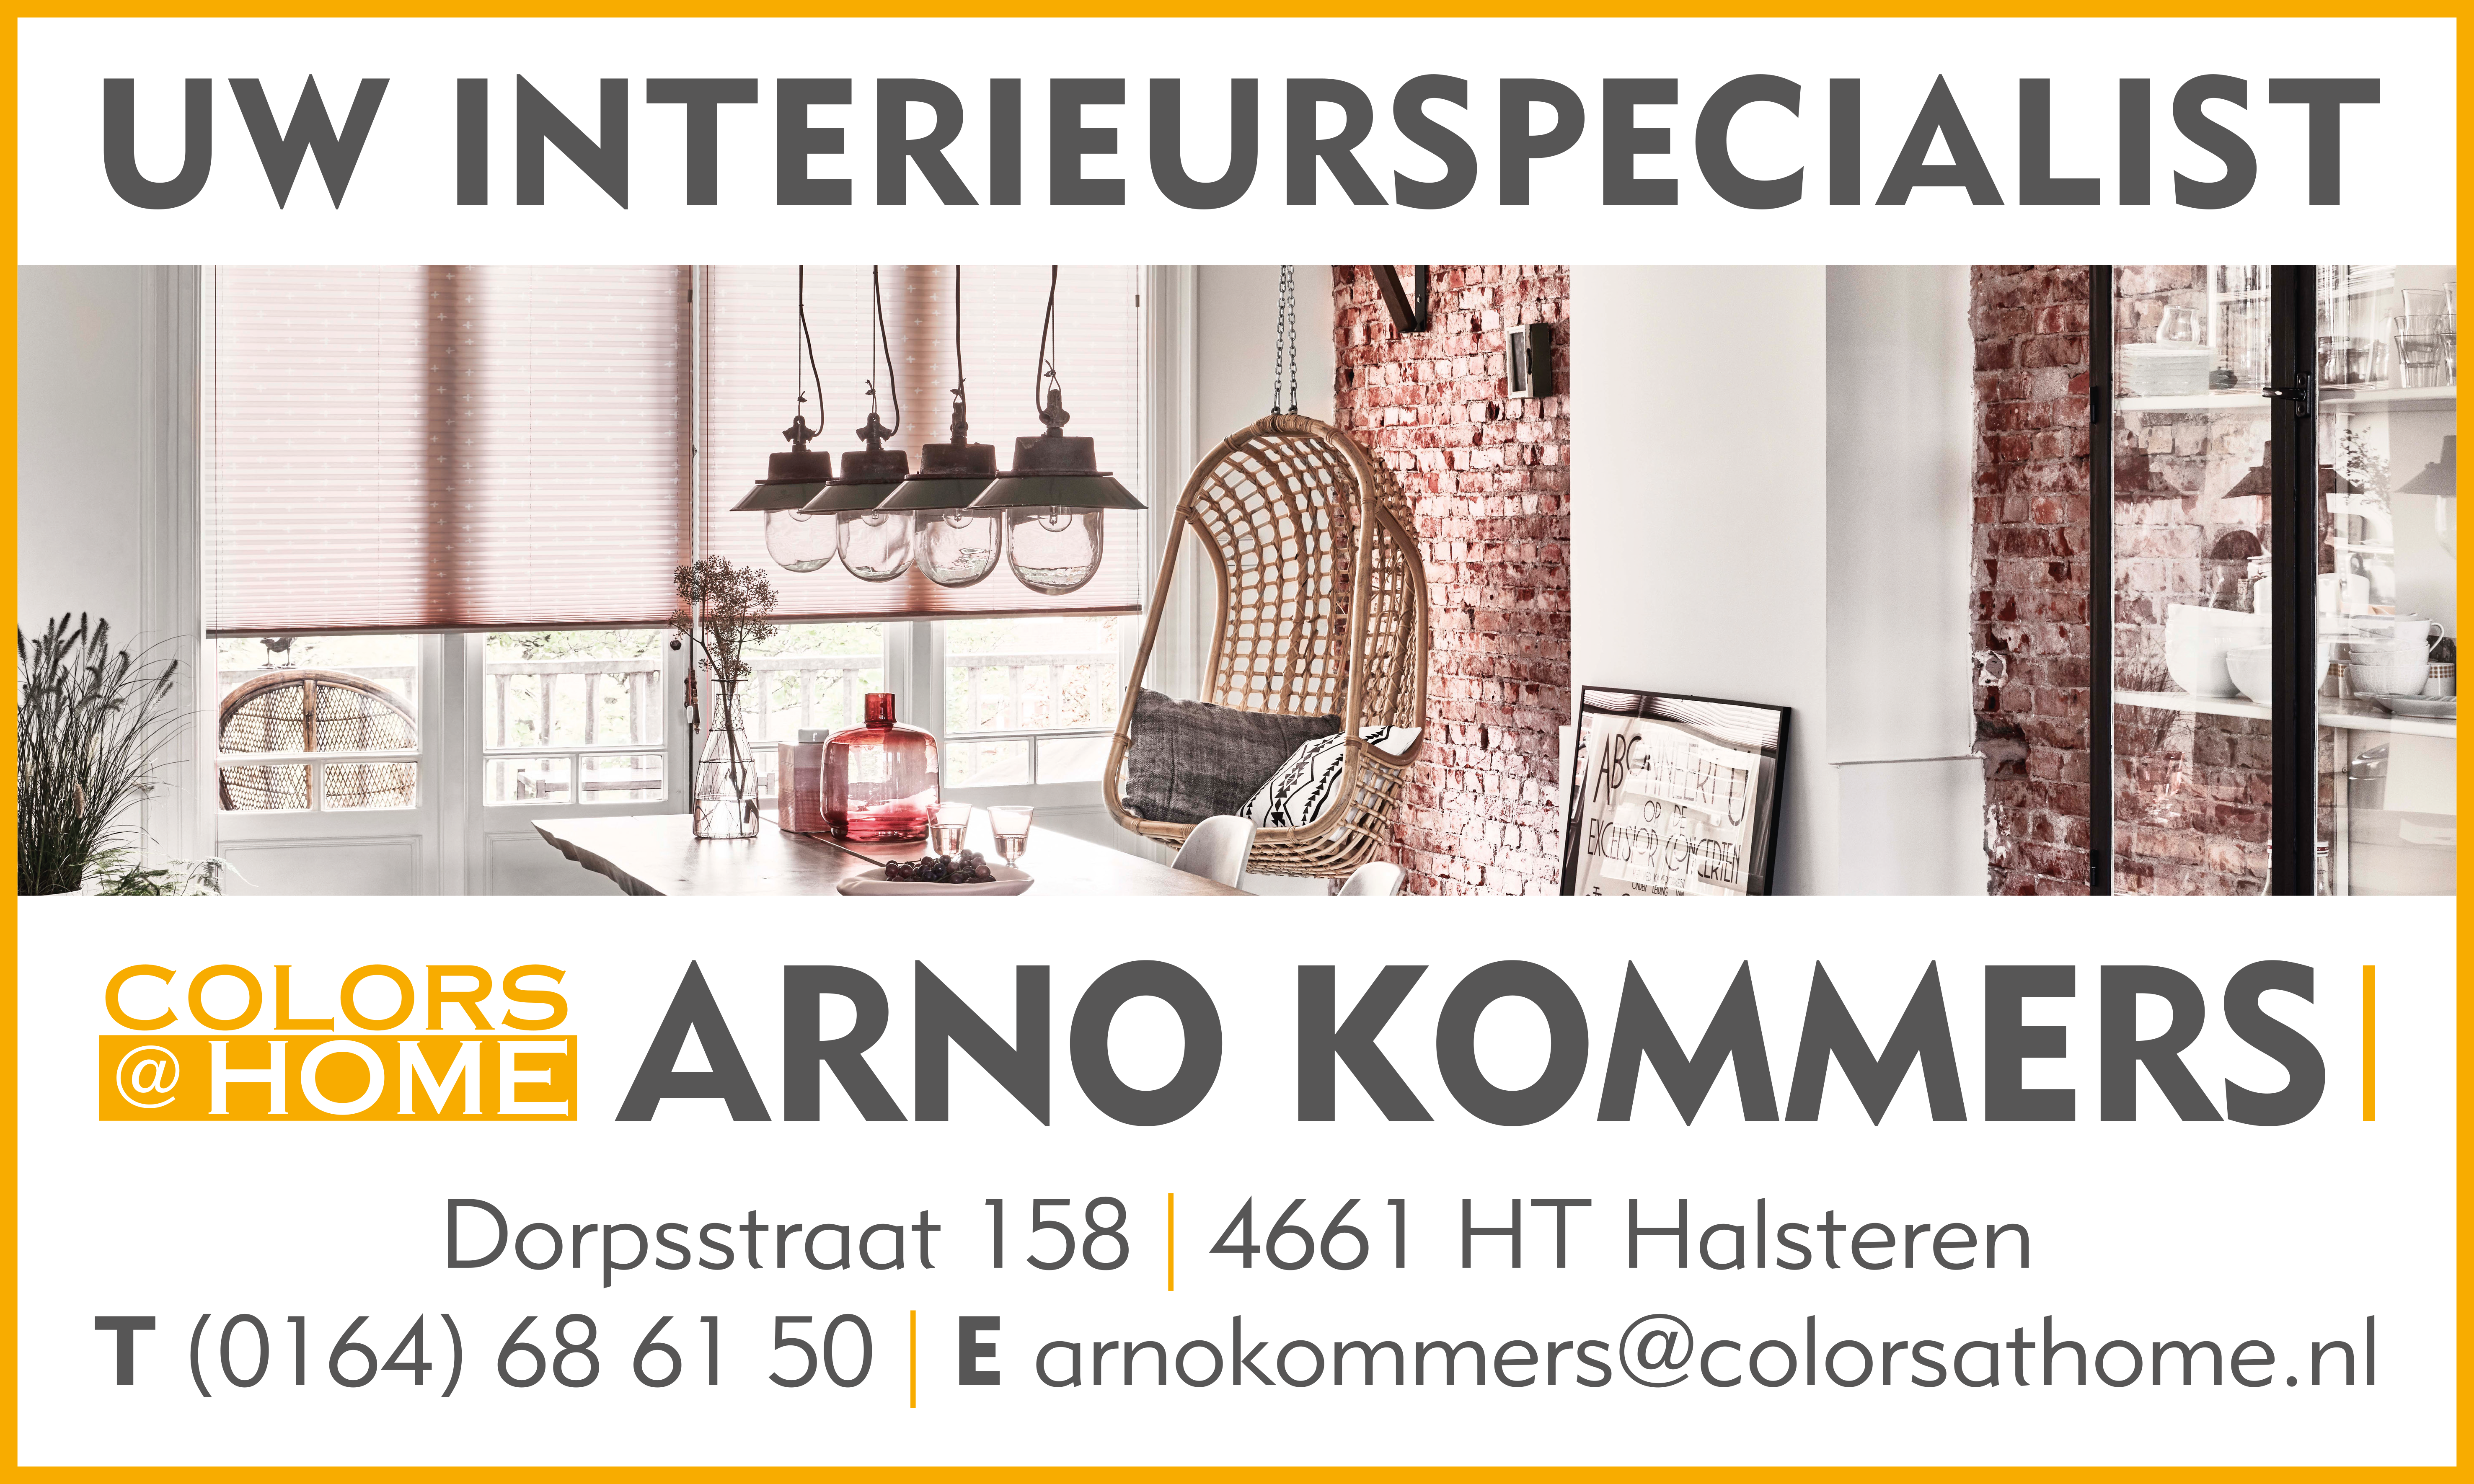 Arno Kommers